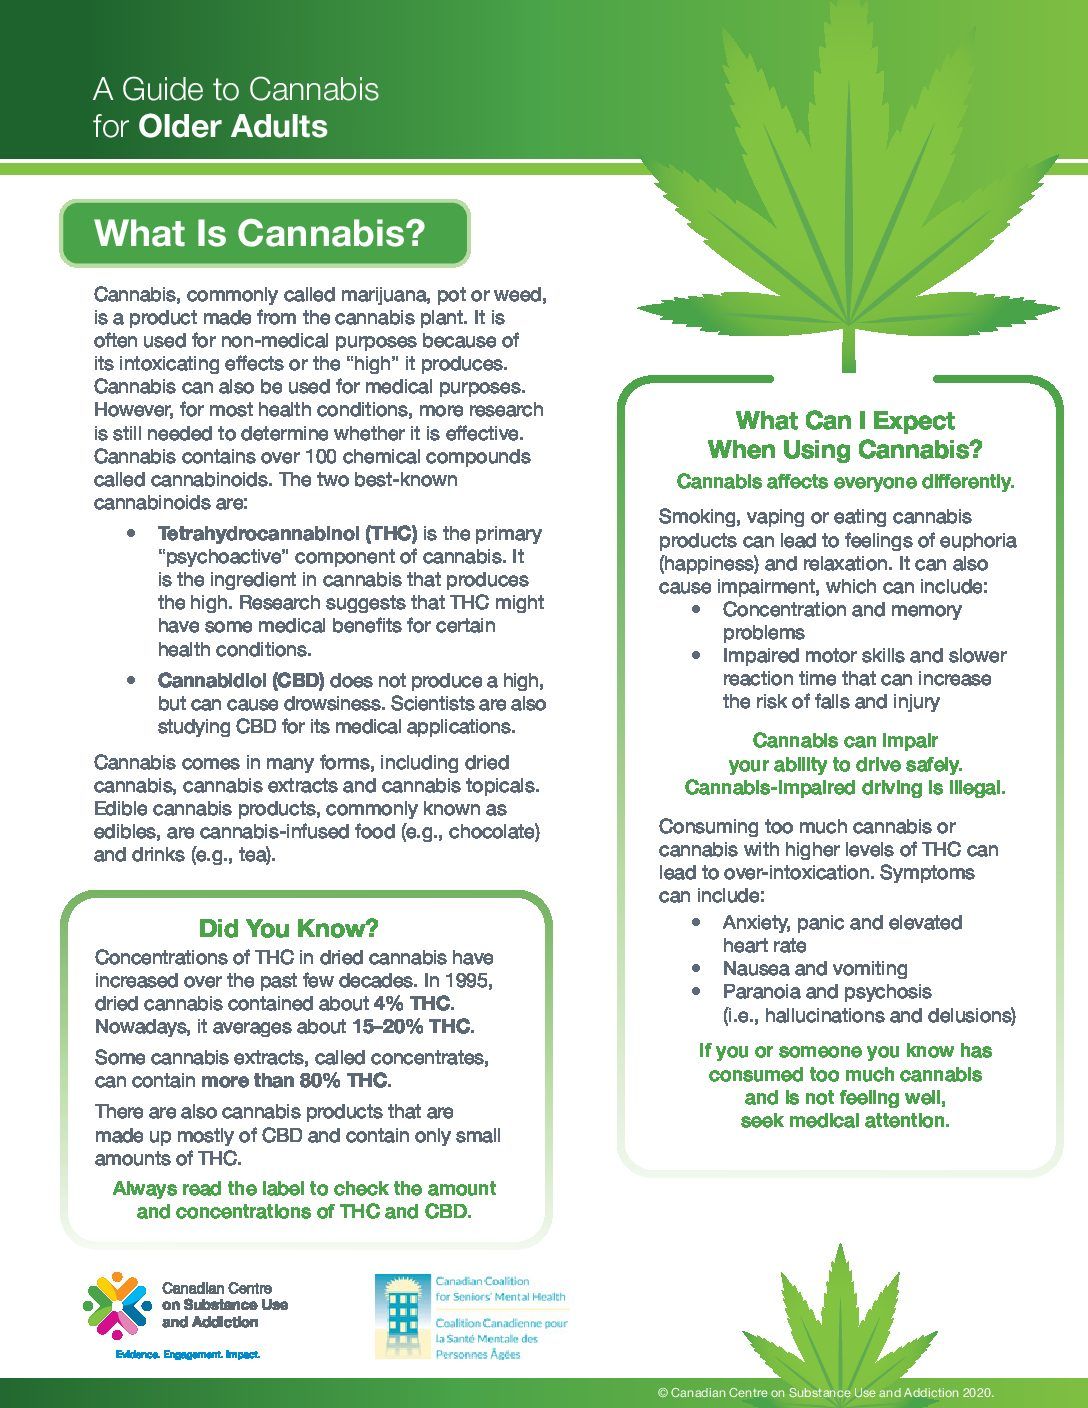 CCSA-Cannabis-Use-Older-Adults-Guide-2020